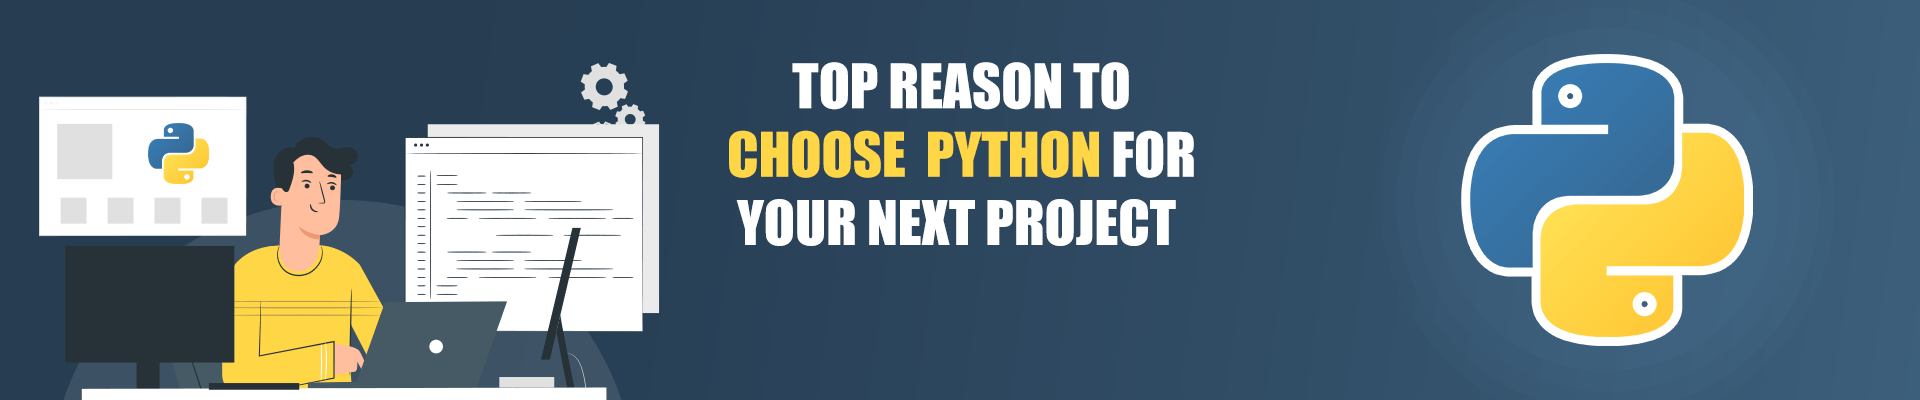 Reasons to Choose Python for Your Next Project